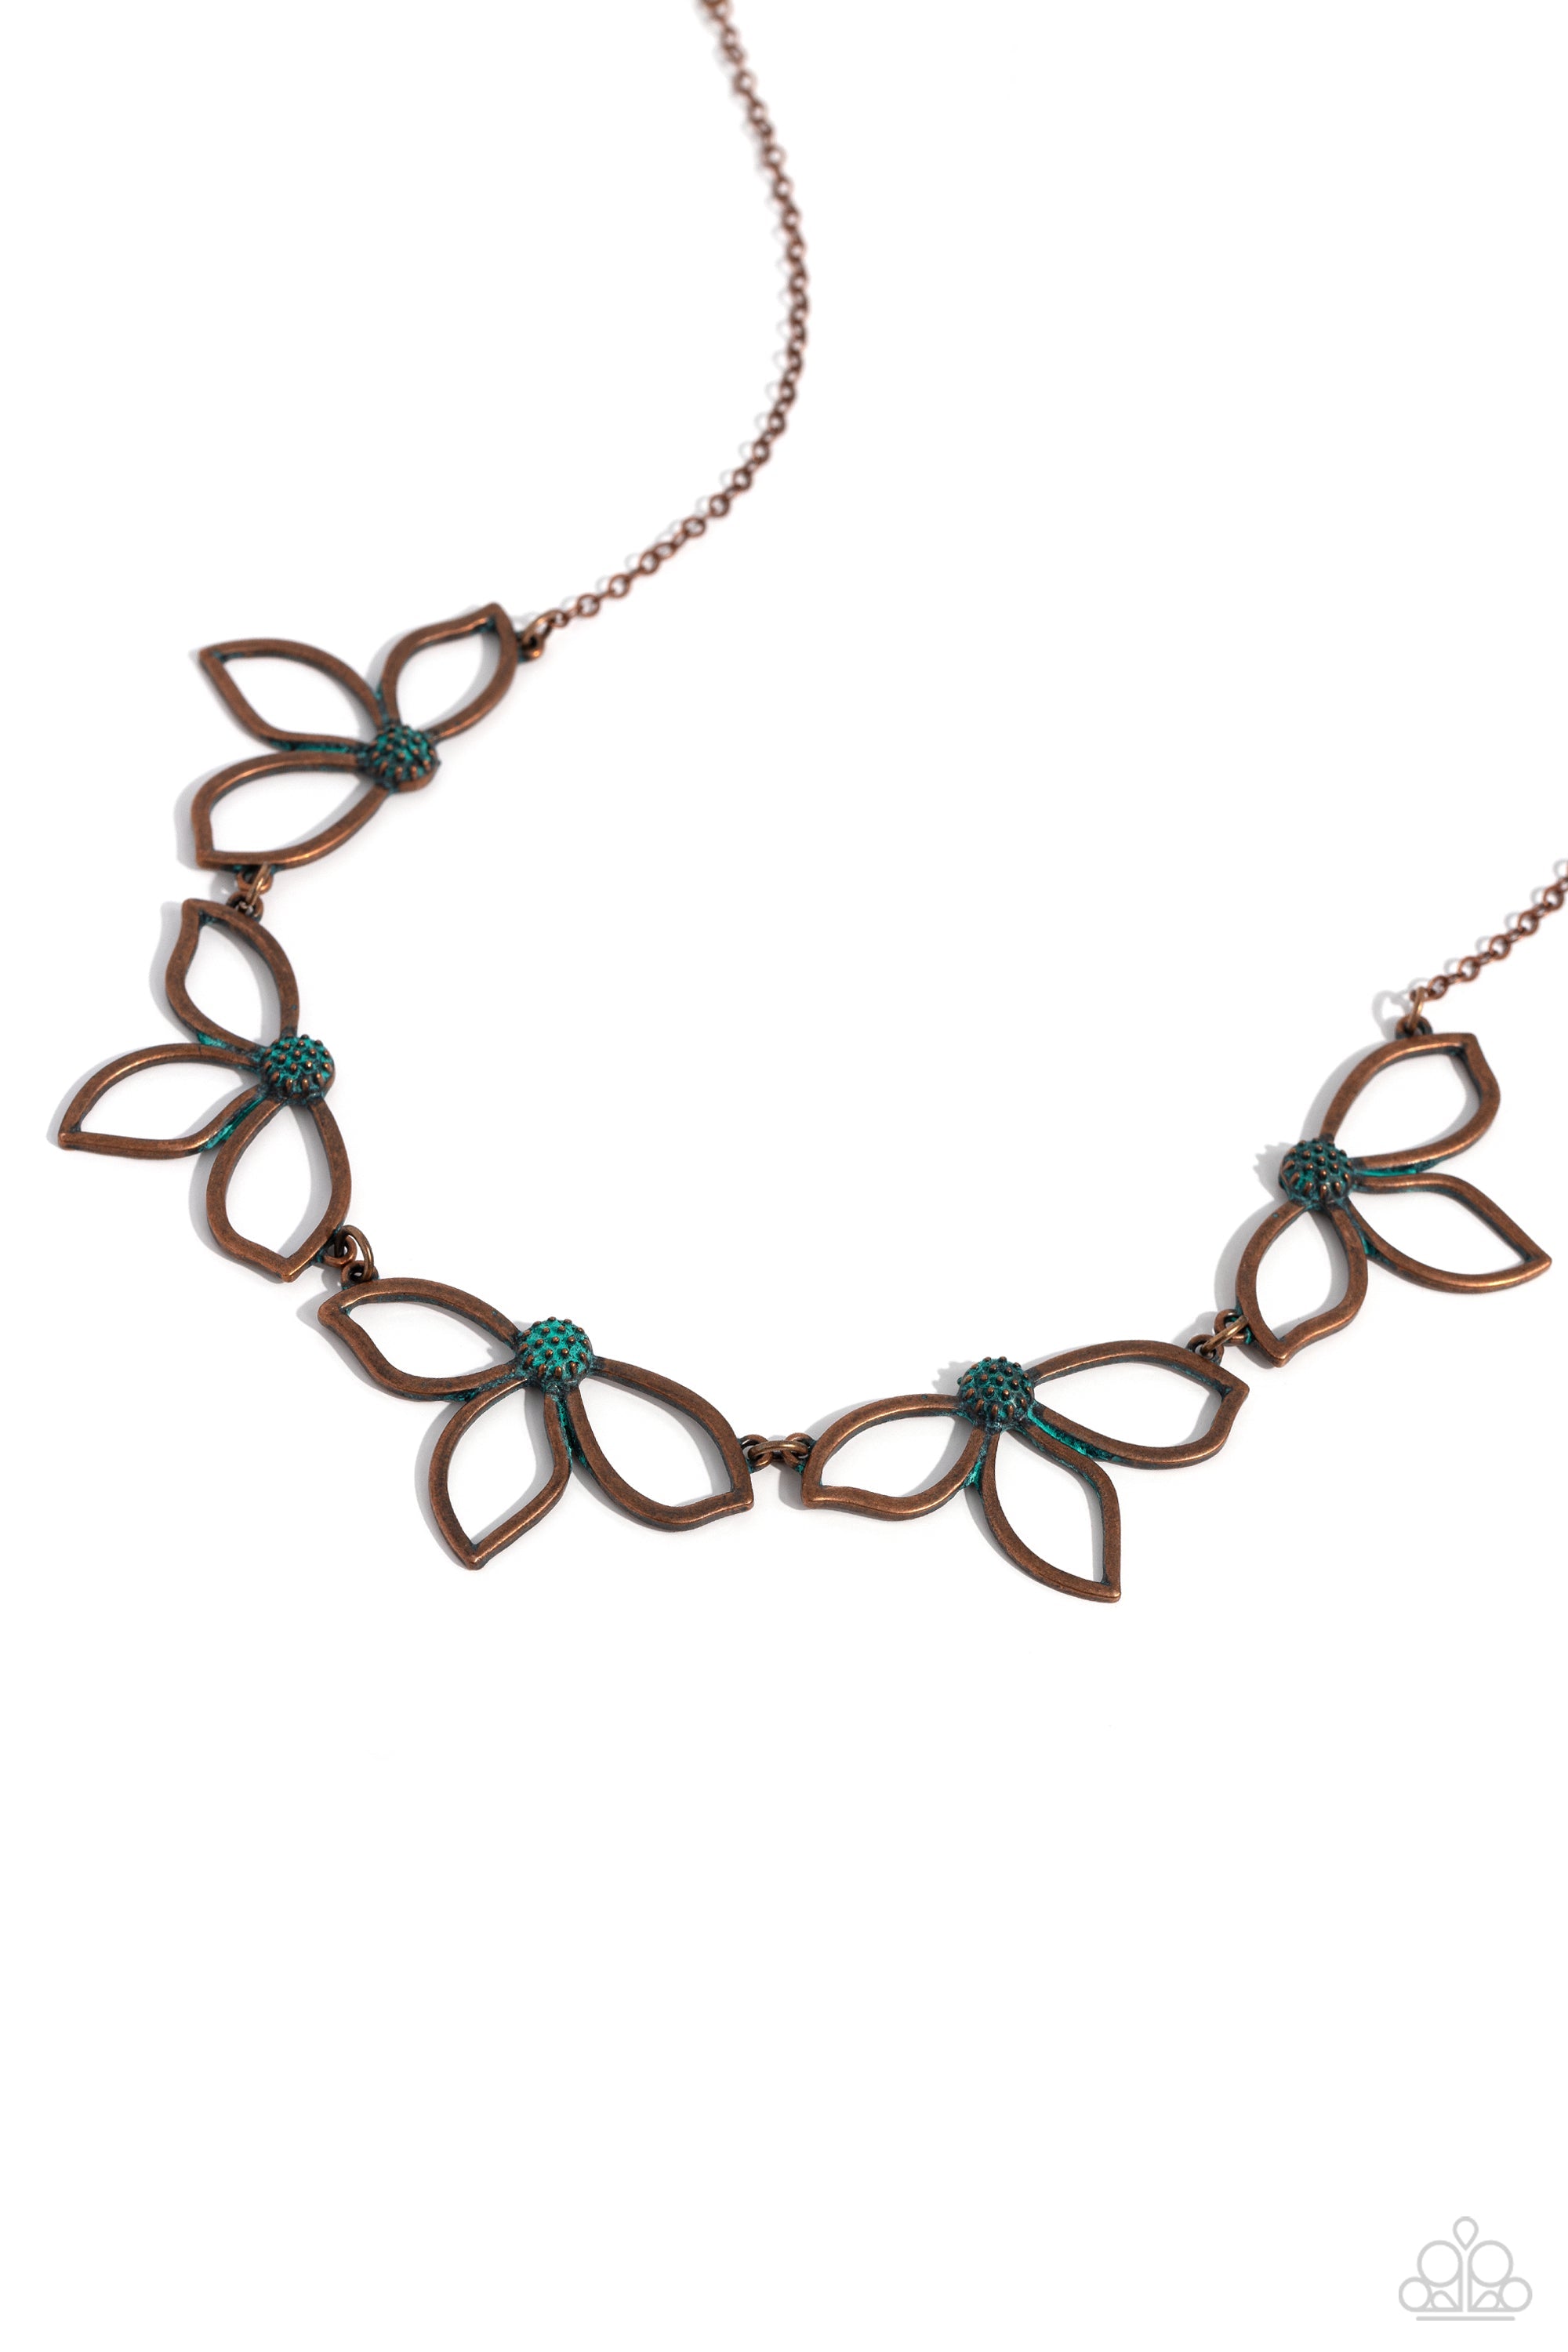 Petal Pageantry Copper Necklace - Paparazzi Accessories- lightbox - CarasShop.com - $5 Jewelry by Cara Jewels